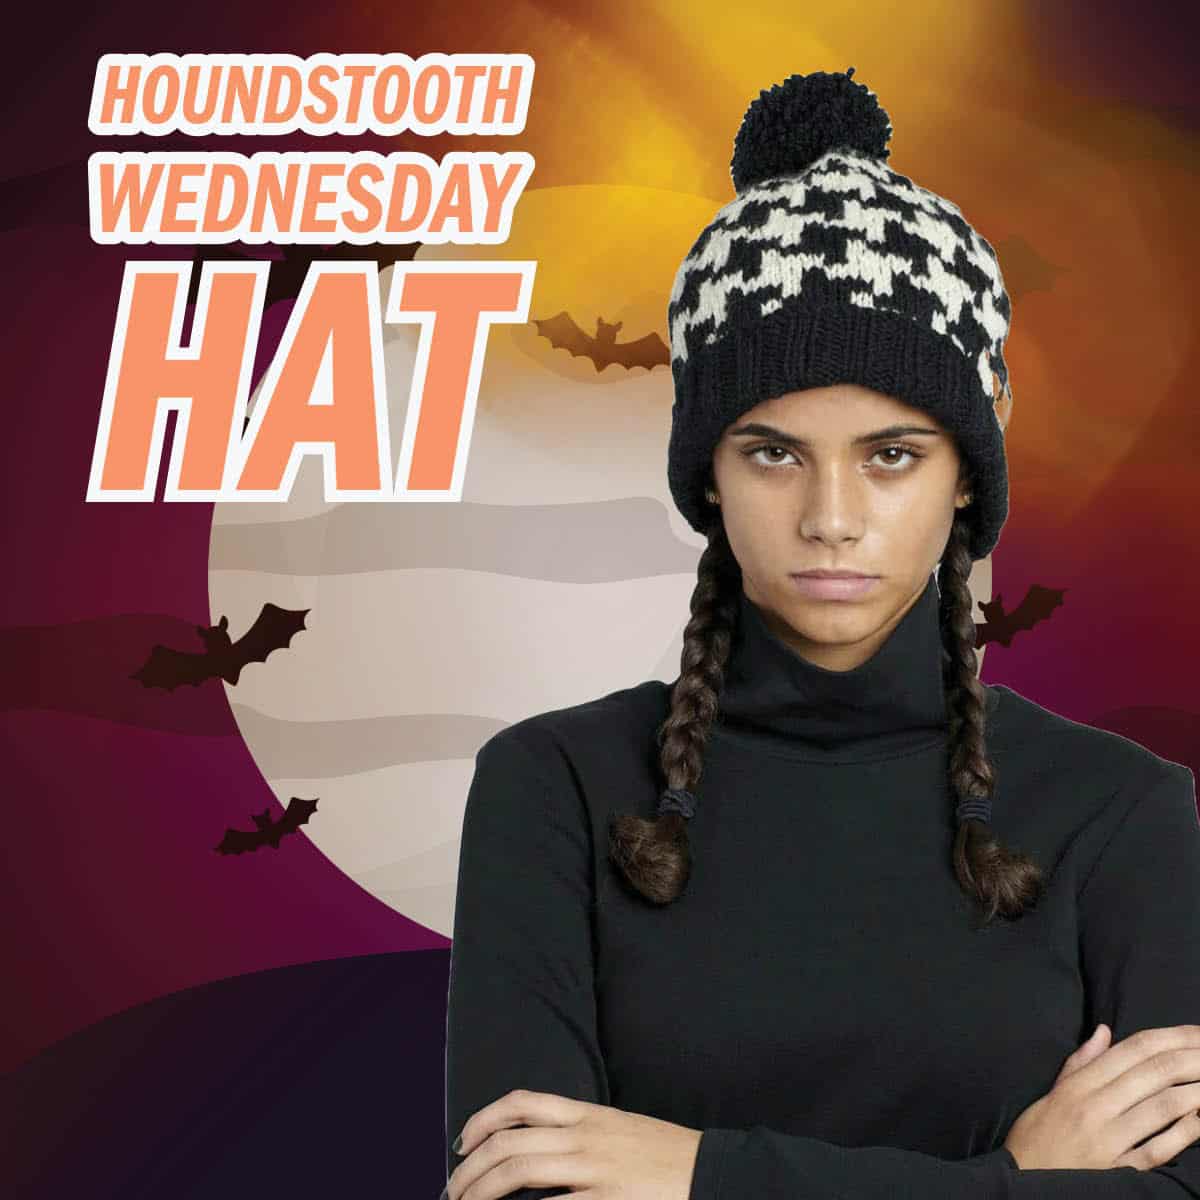 Knit Houndstooth Hat, Something Wednesday Might Wear Pattern + Tutorial